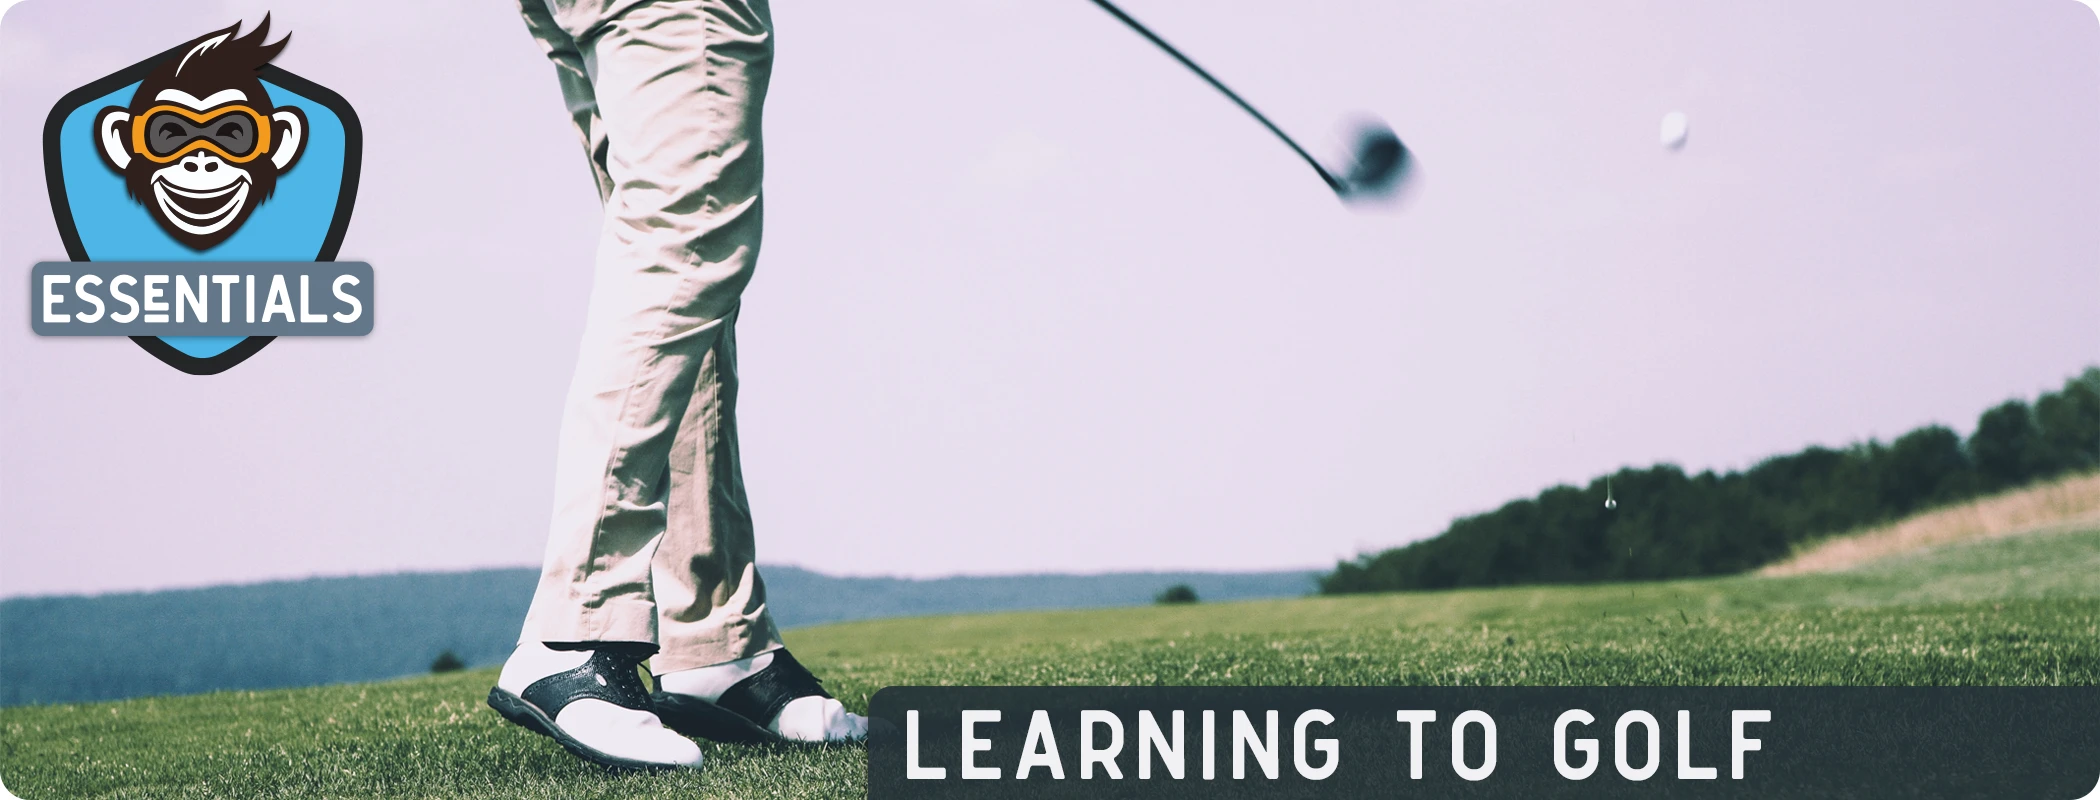 Learning to Golf Essentials